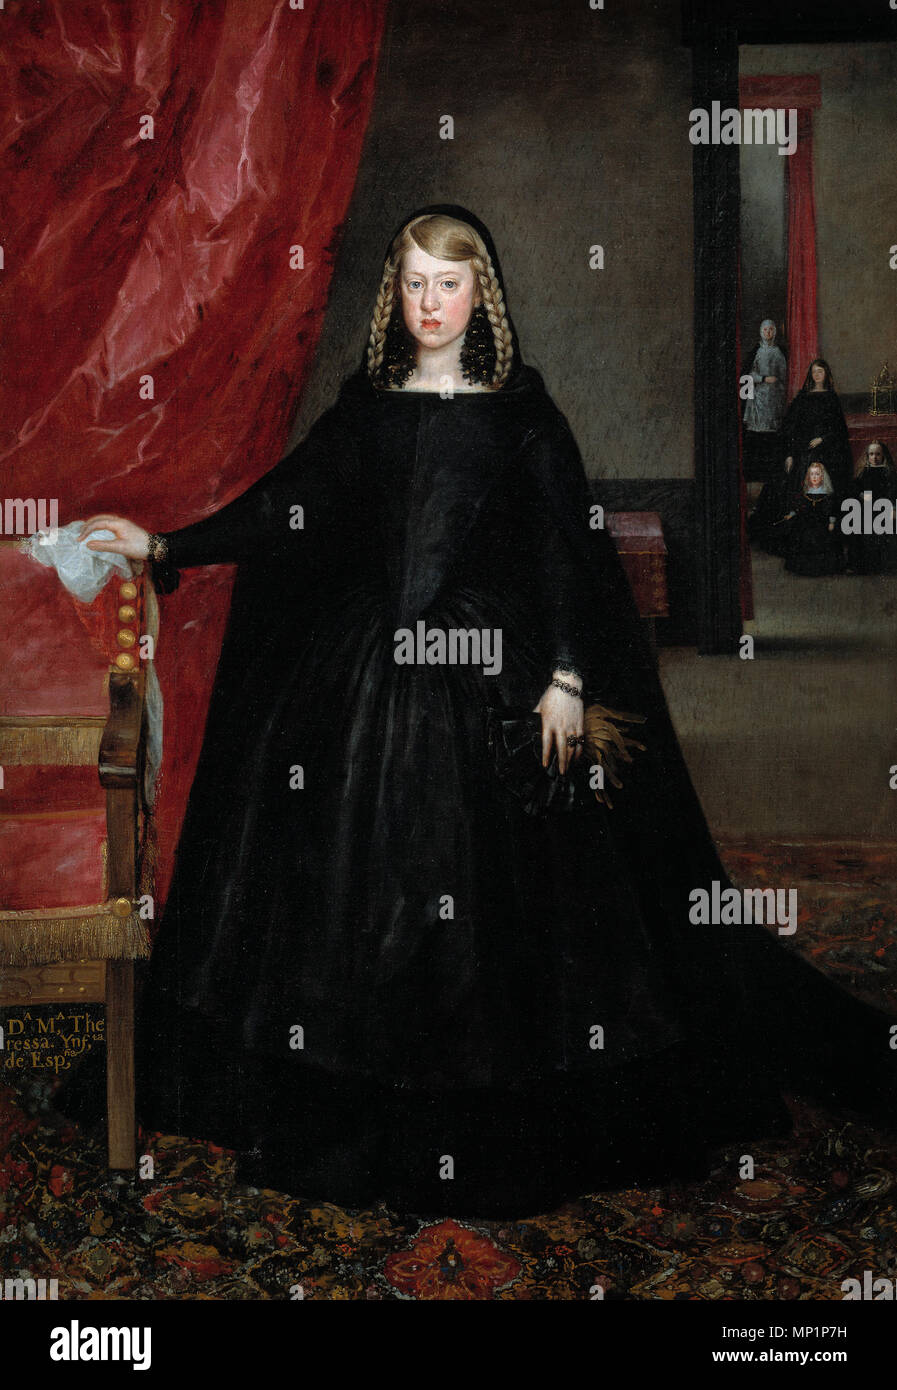 Spanish: La emperatriz Margarita de Austria The Empress Doña Margarita de Austria in Mourning Dress .  English: The sitter is Margaret of Spain, first wife of Leopold I, Holy Roman Emperor, wearing mourning dress for her father, Philip IV of Spain, with children and attendants in mourning dress. . 1666.   855 Margarita Teresa of Spain Mourningdress Stock Photo